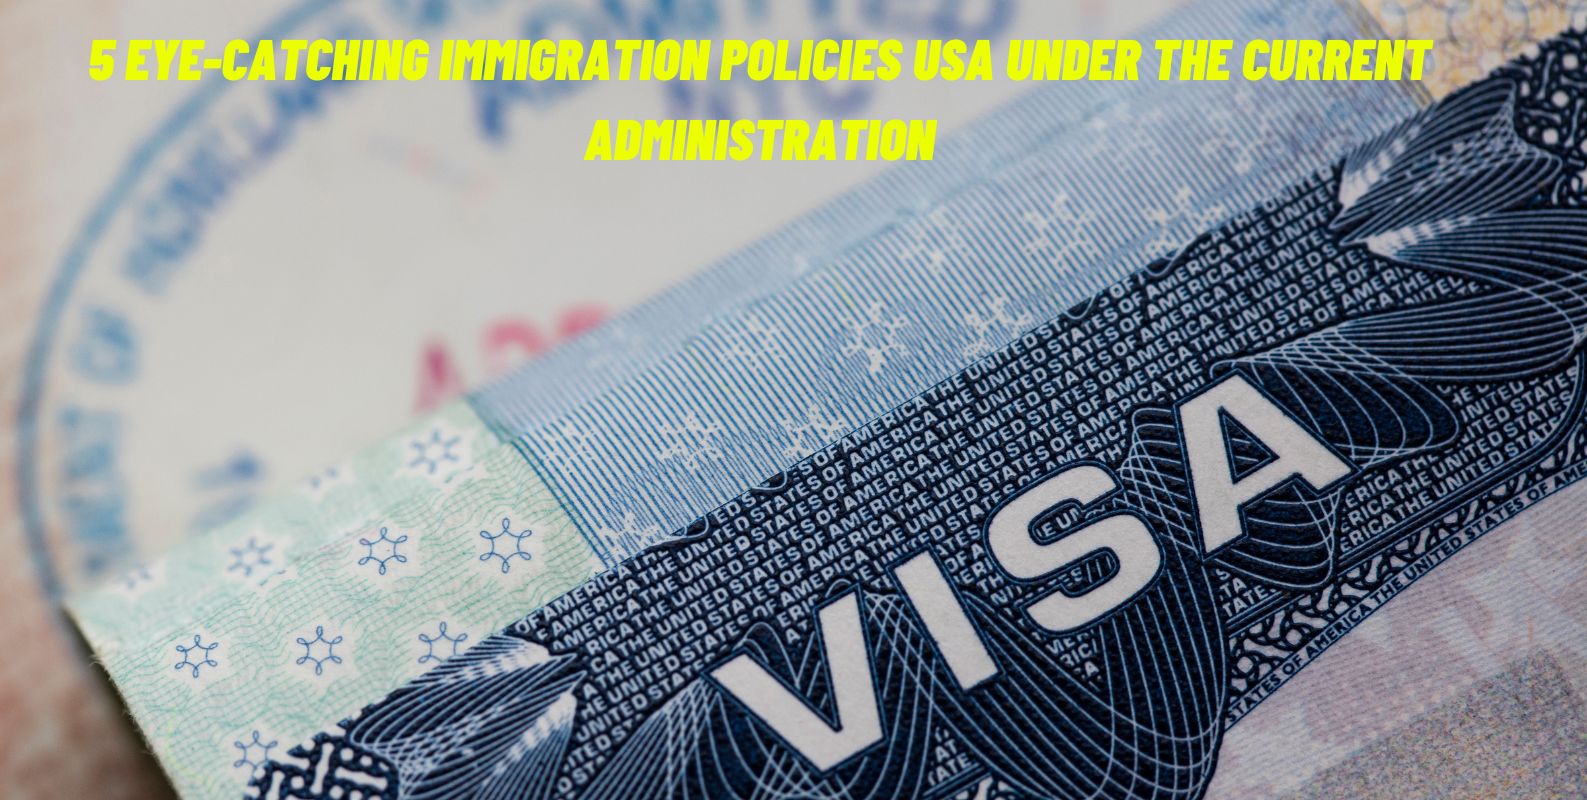 Immigration Policies USA, Administration Stance, Border Security, Immigrant Rights, Policy Changes